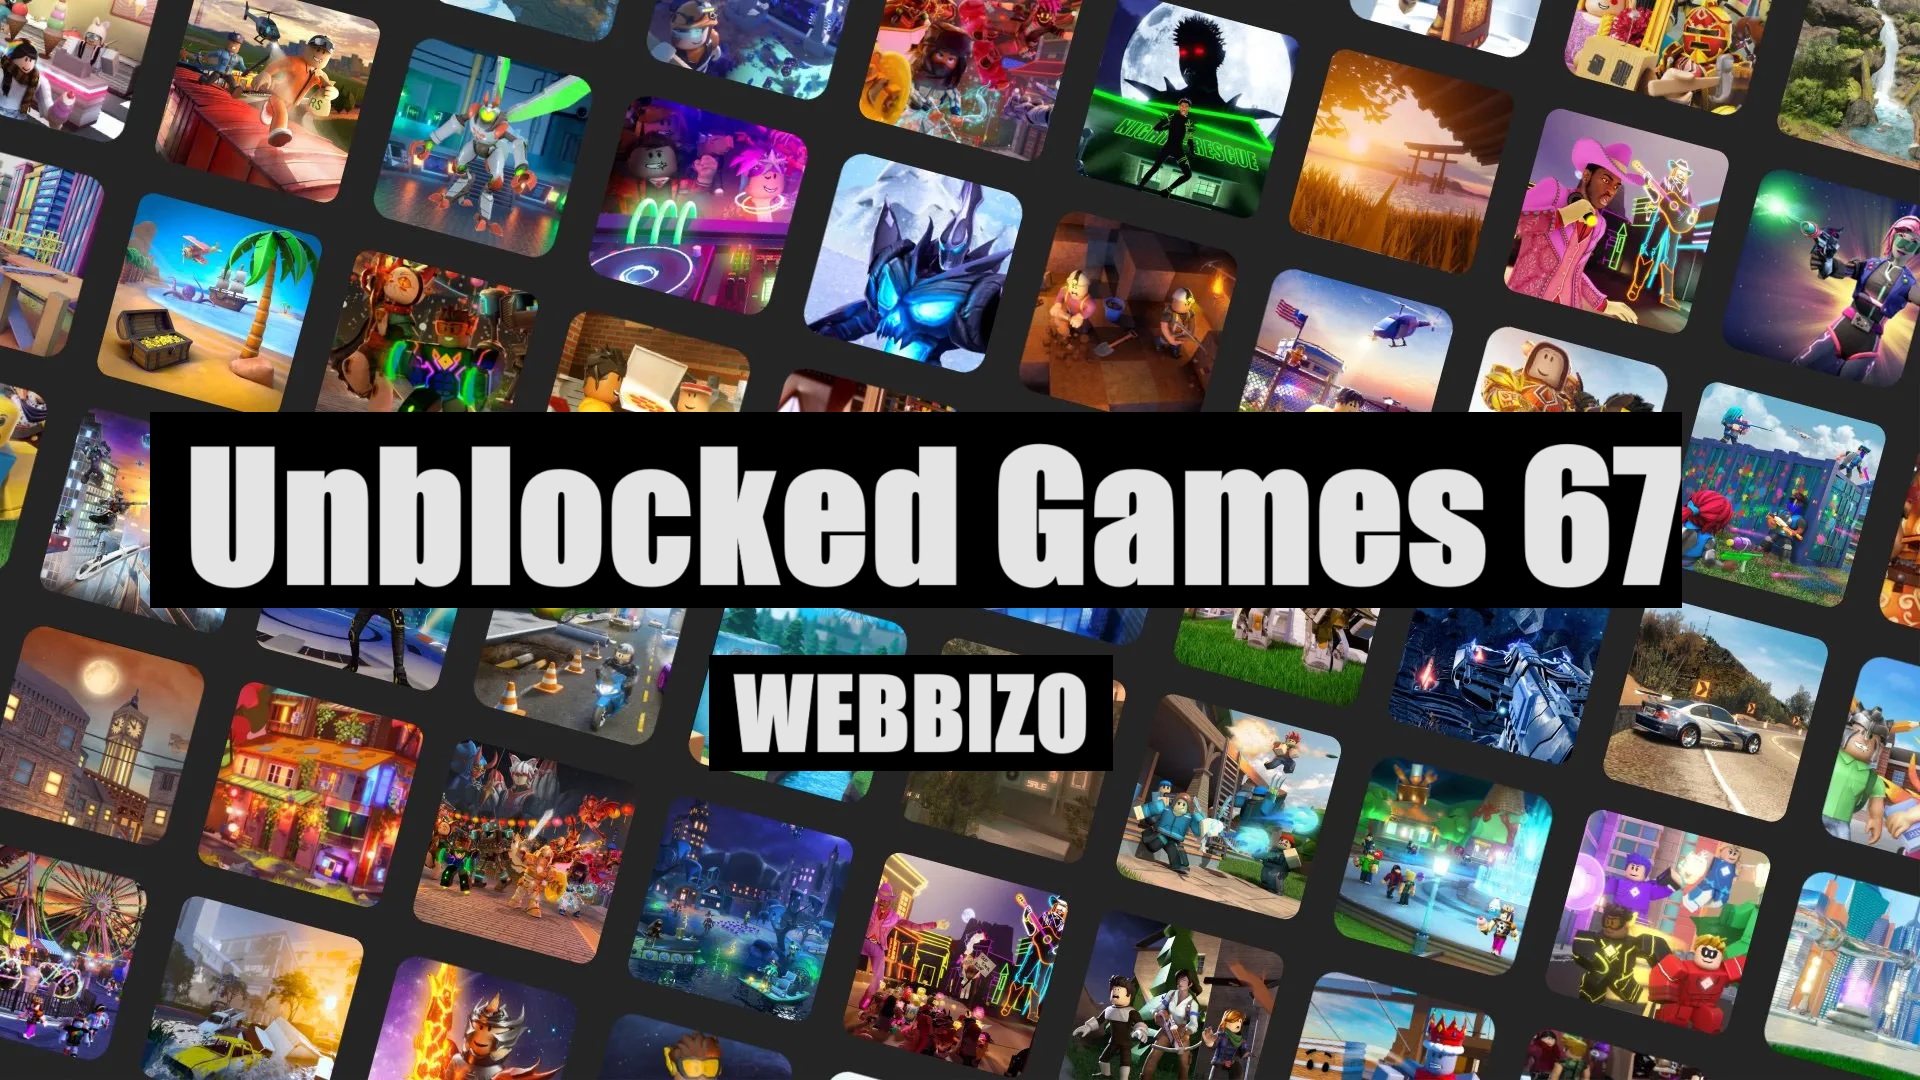 Unblocked Games 67: The Ultimate Gaming Destination for Students in 2023